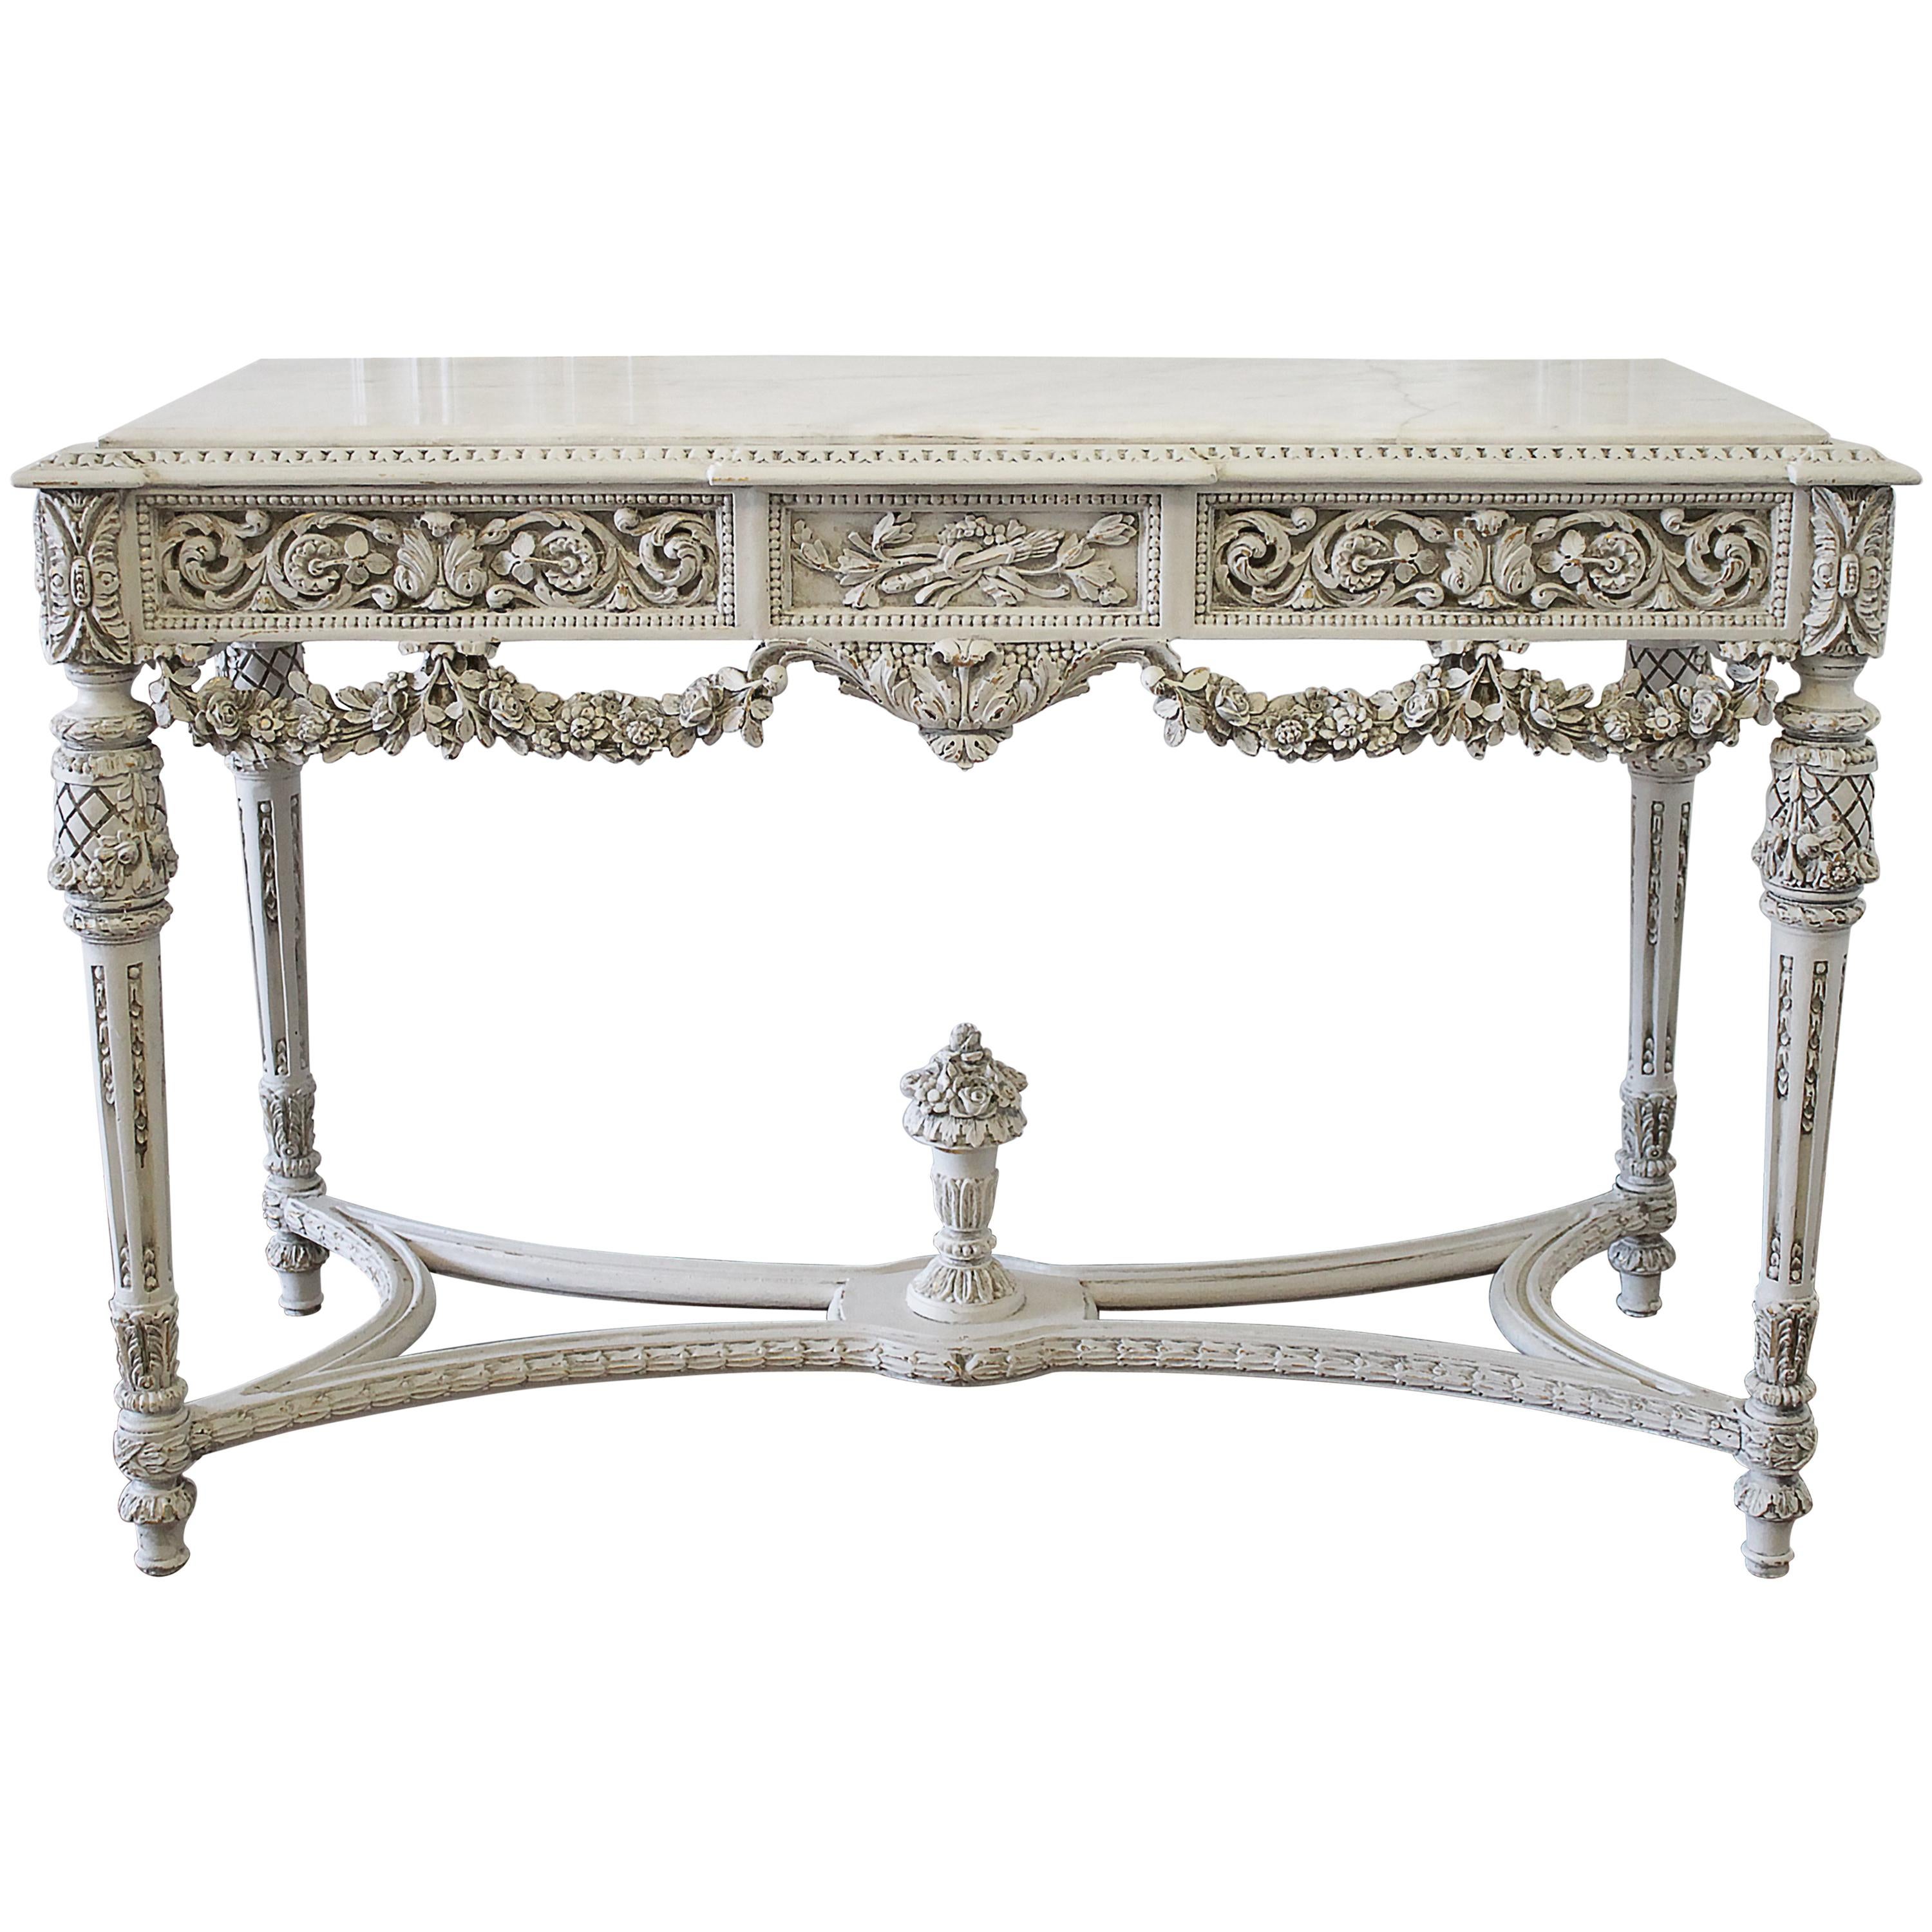 20th Century French Louis XVI Style Carved Wood and Marble Console Table